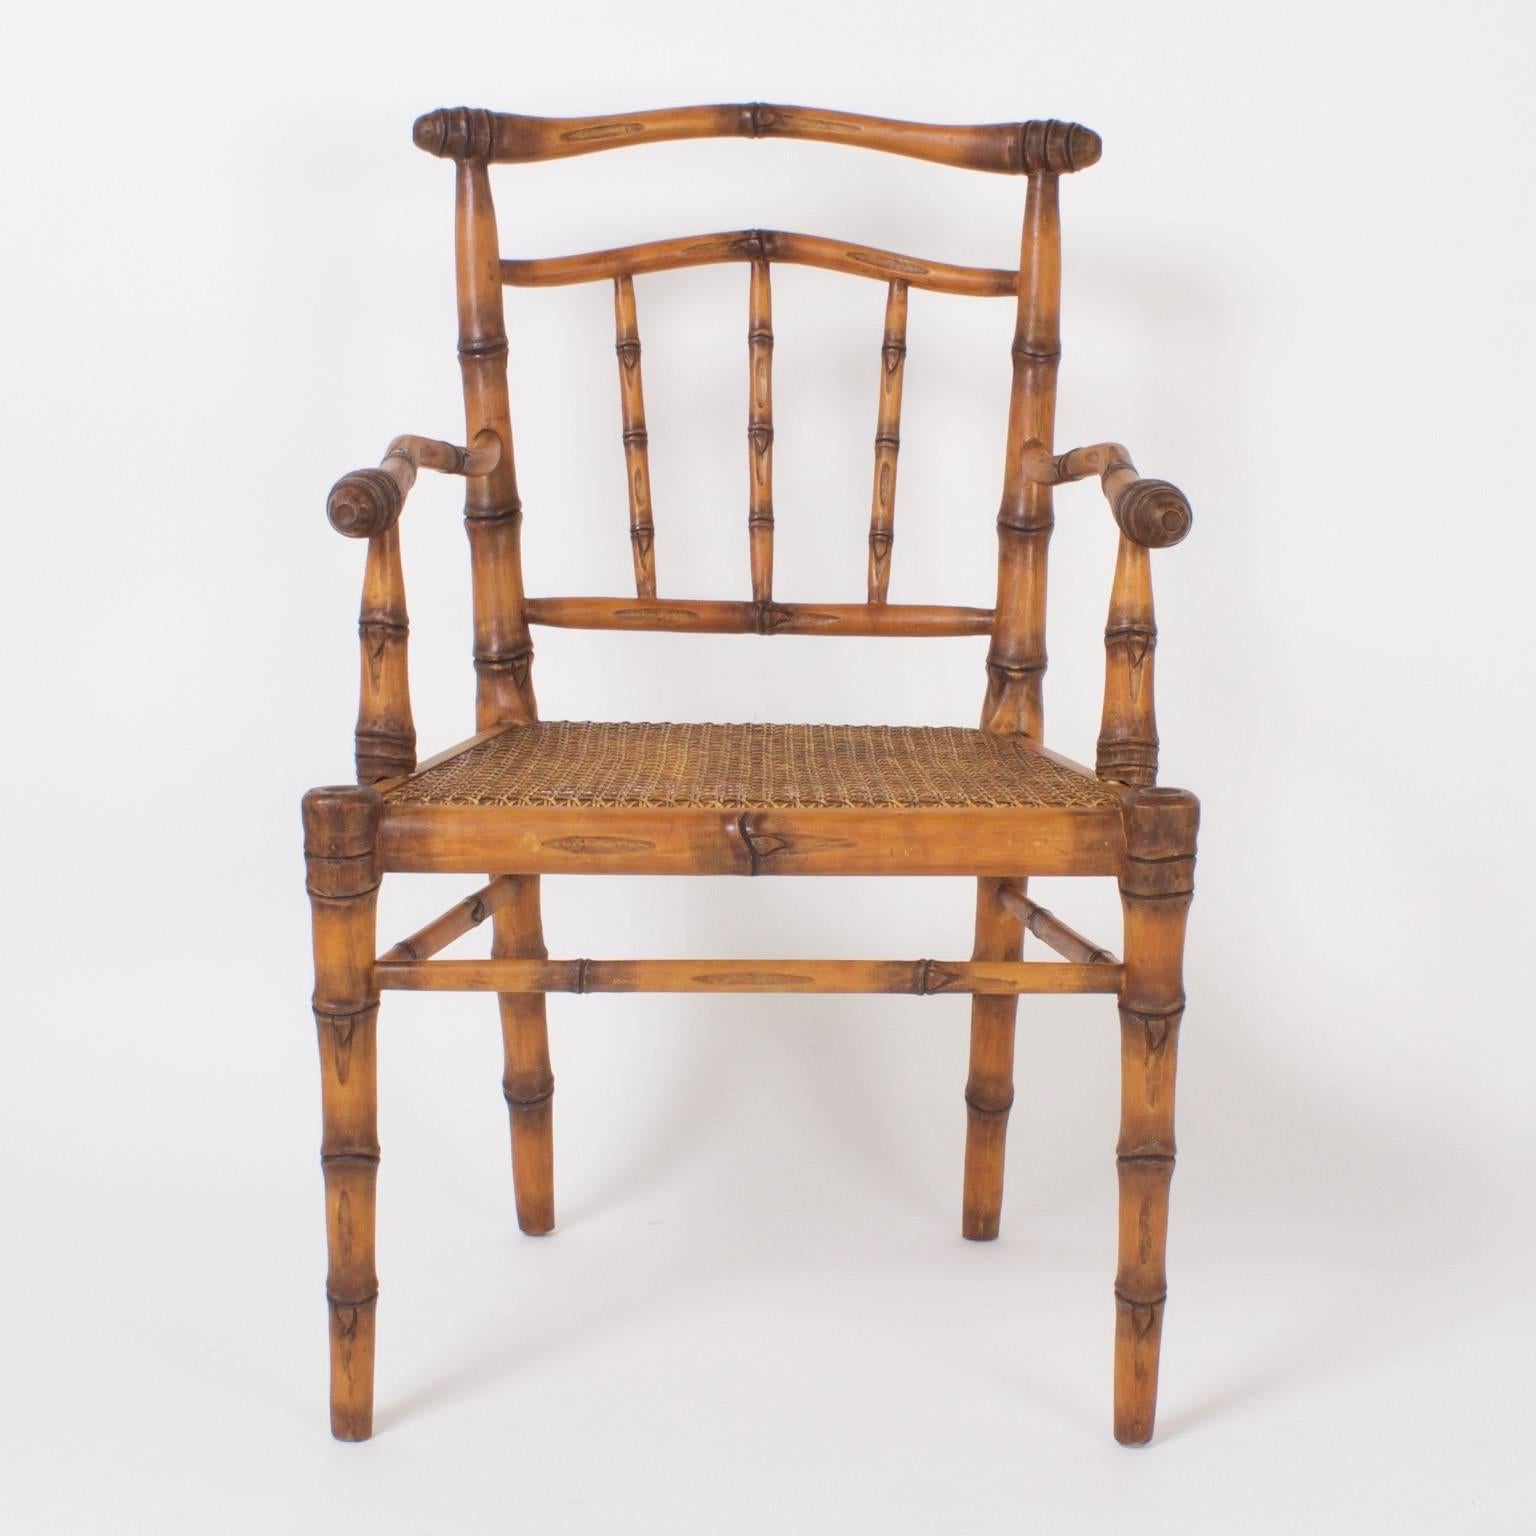 Vintage set of eight carved wood faux bamboo chairs with caned seats and a sophisticated rustic charm. Carved in the mid century style with an expertise that includes the rarely seen root ball and a confident, comfortable stance.
        